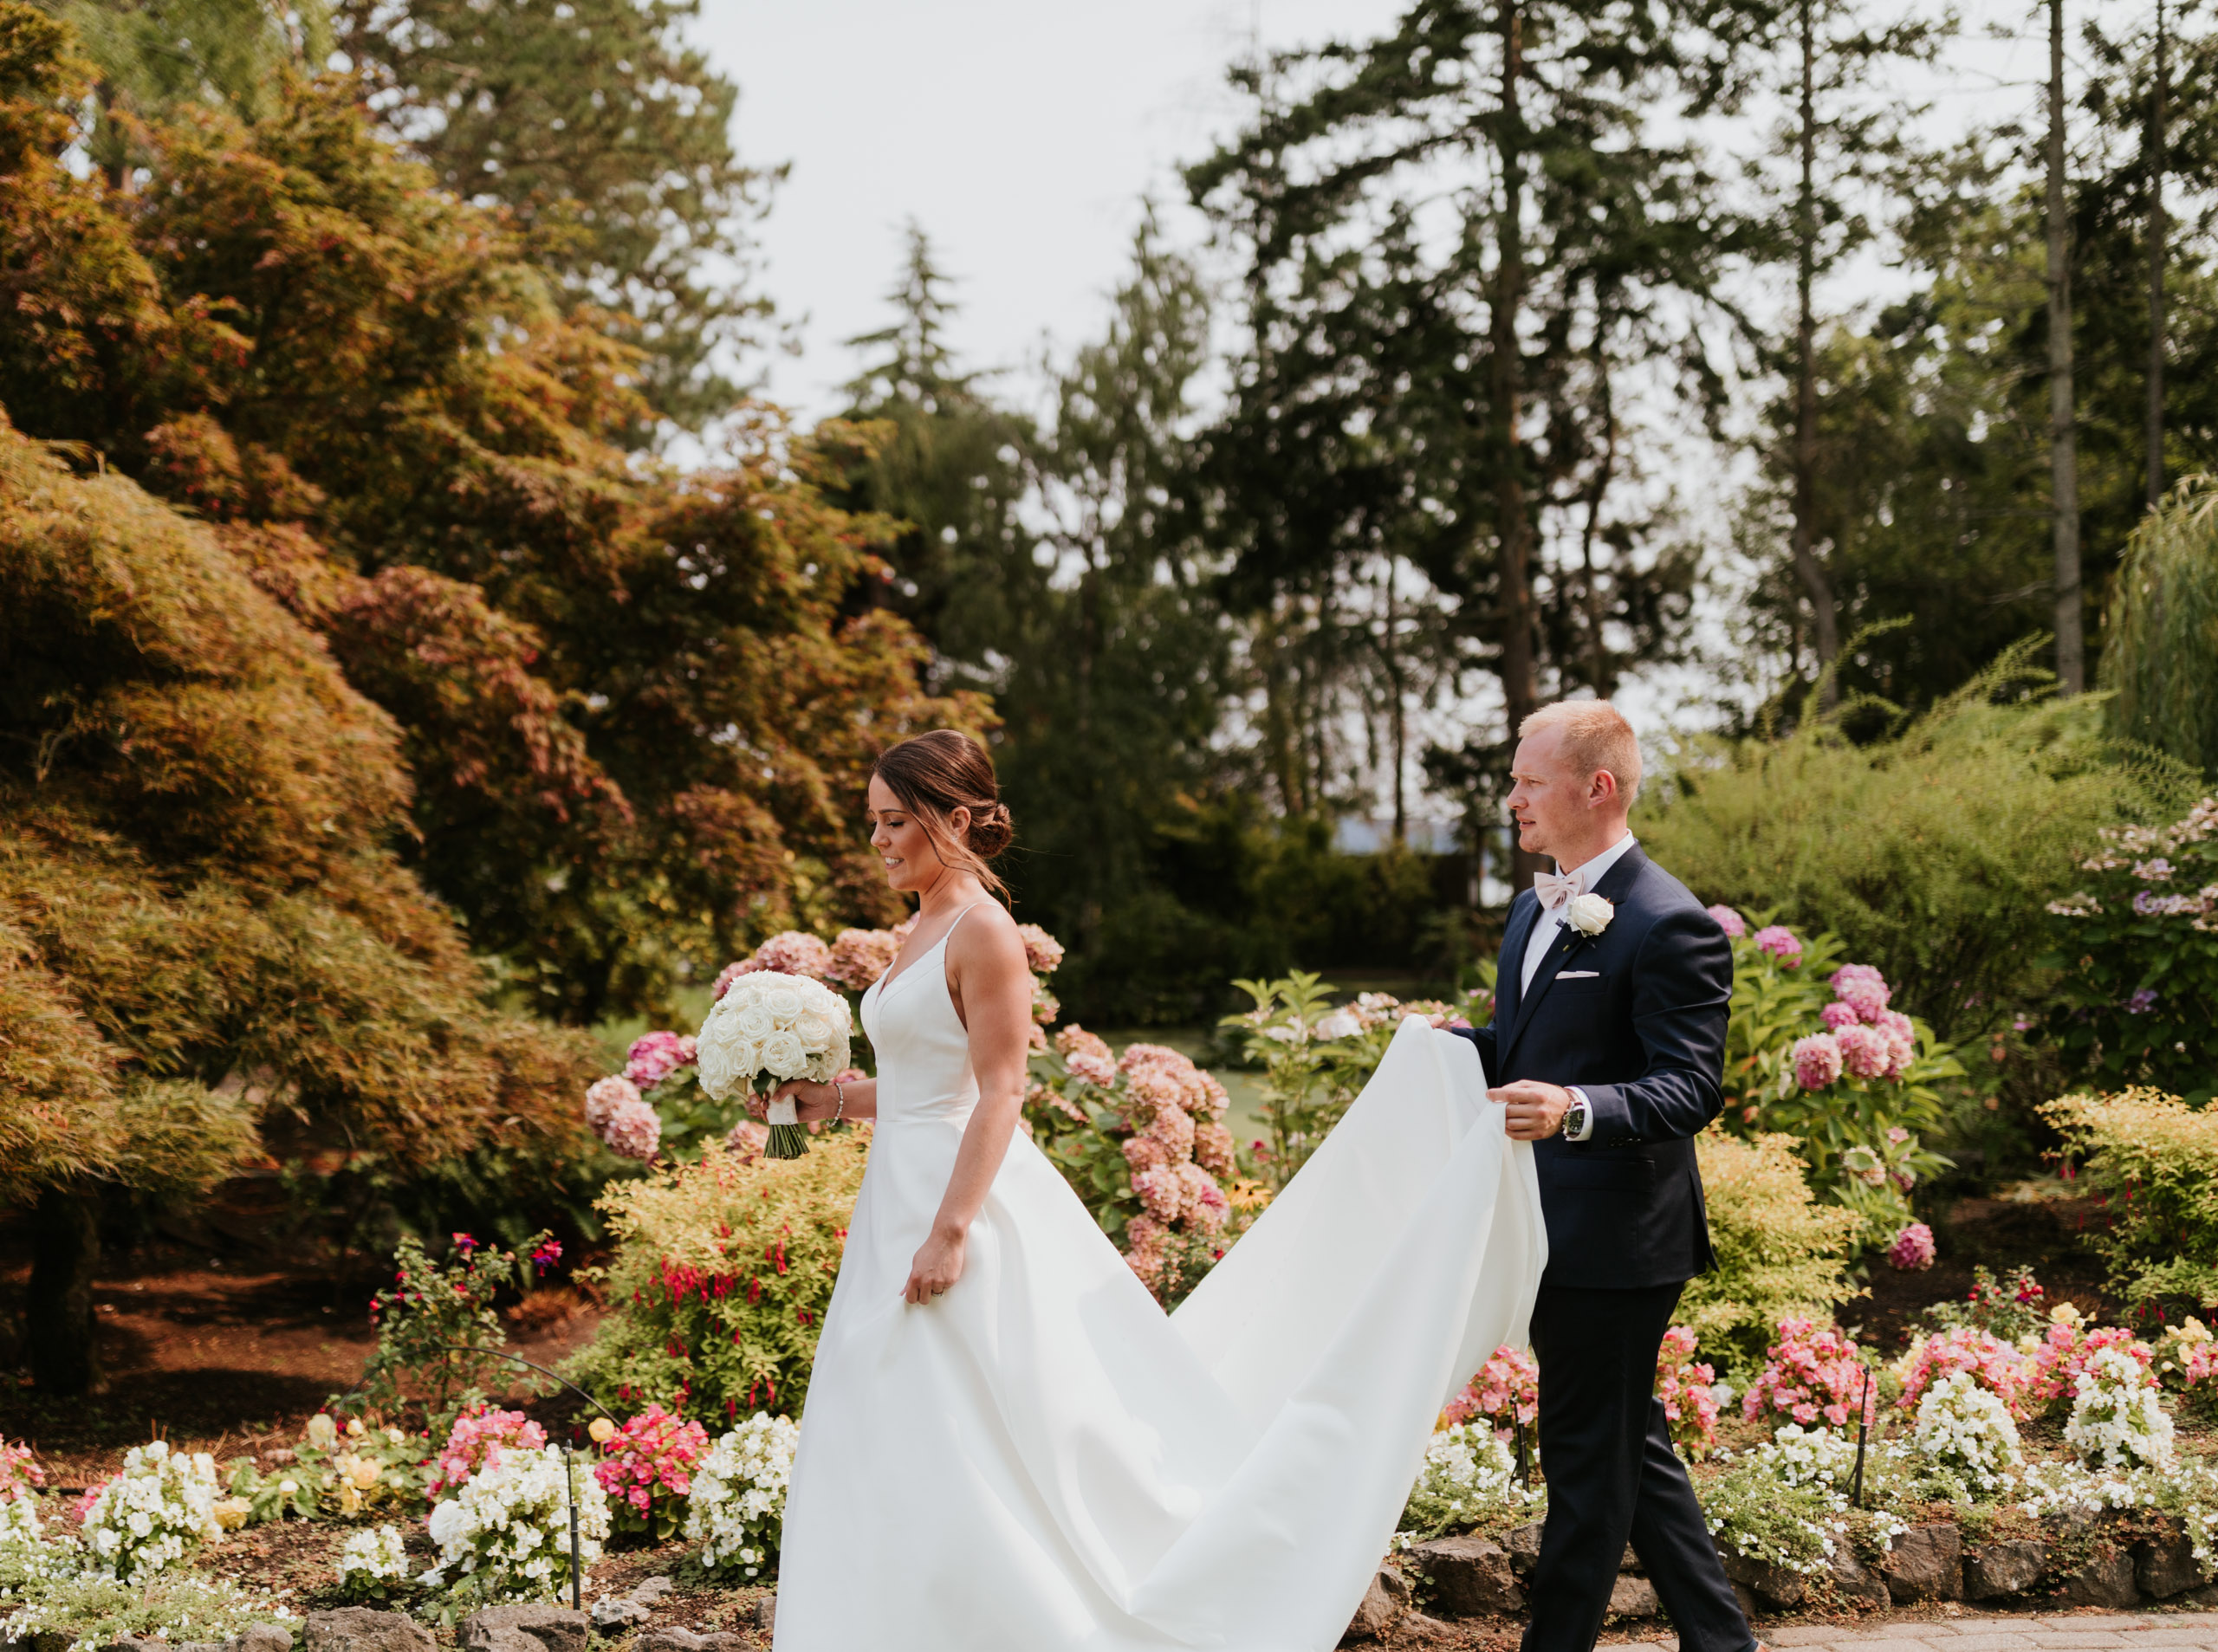 https://breannapluskevin.com/wp-content/uploads/photo-gallery/imported_from_media_libray/kiana-lodge-wedding-bm-breanna-plus-kevin-15.jpg